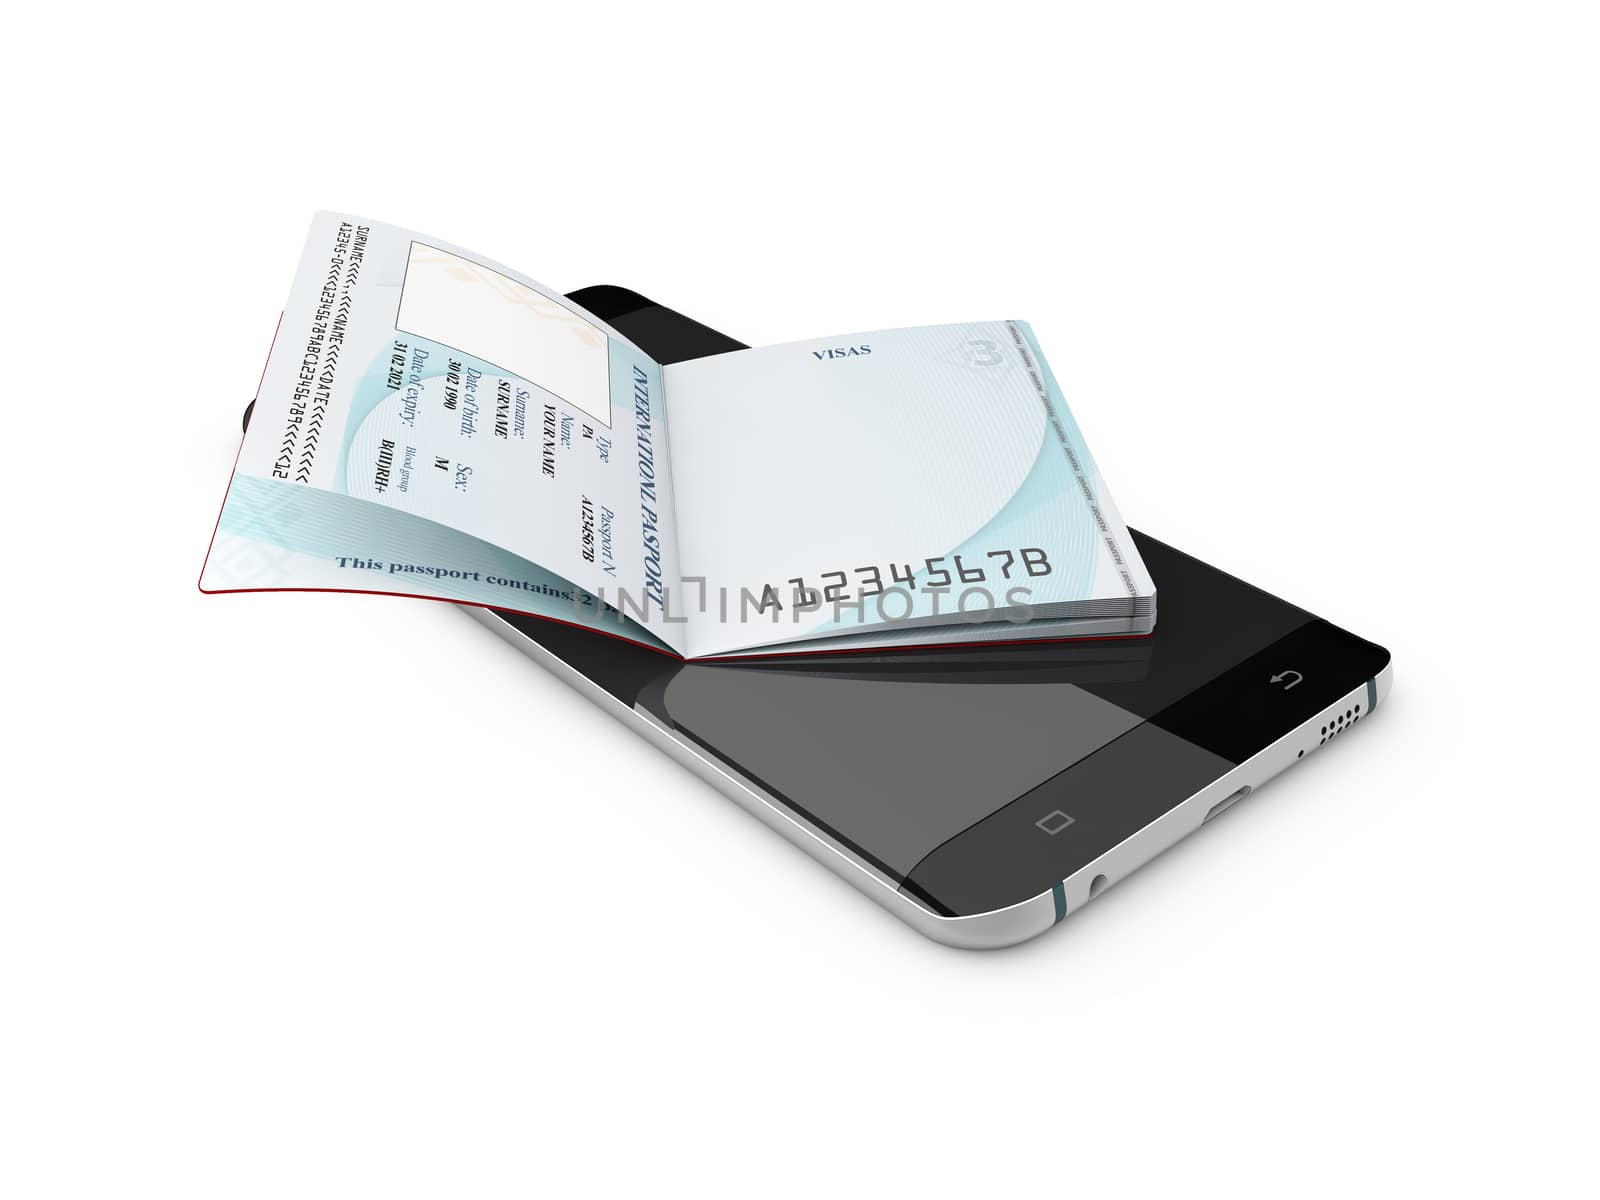 Mobile phone and Passport on white background by tussik